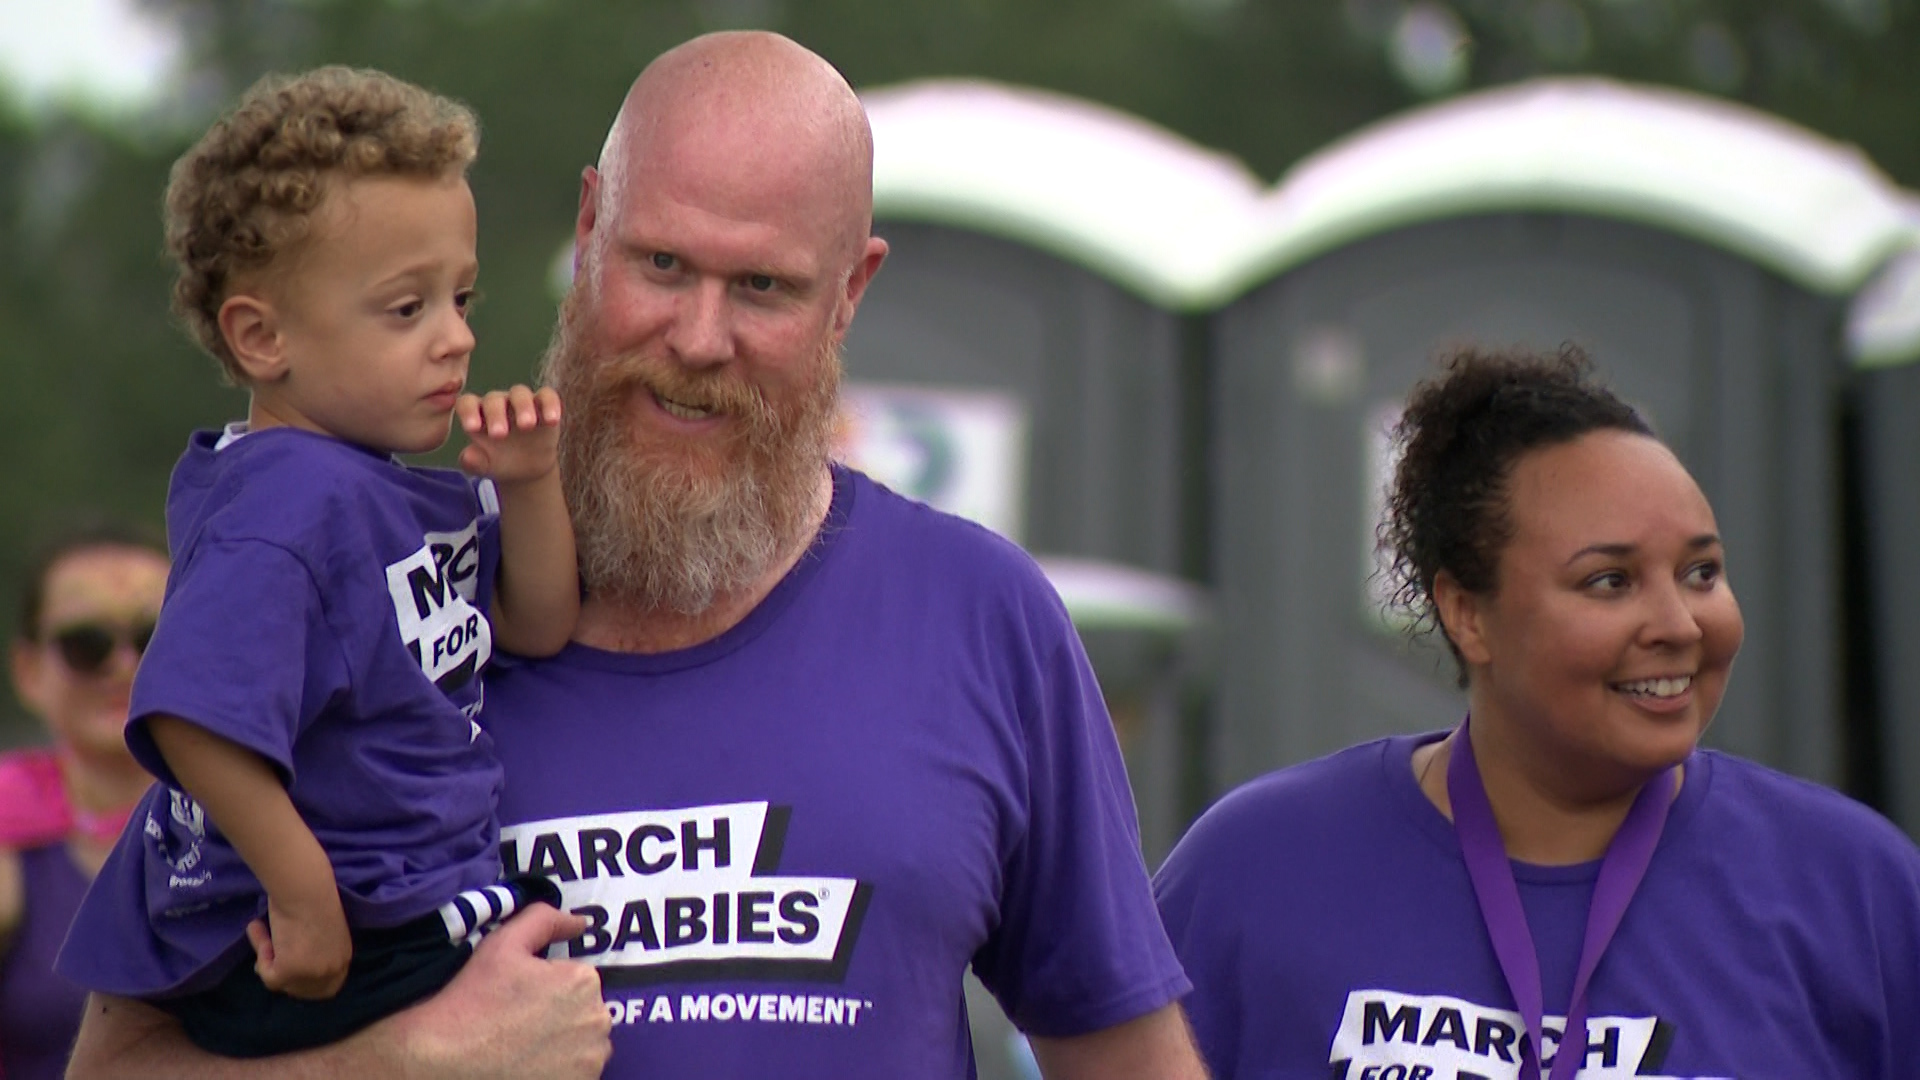 March for Dimes held its annual "March for Babies" walk to rally behind families with maternal and infant health care struggles.